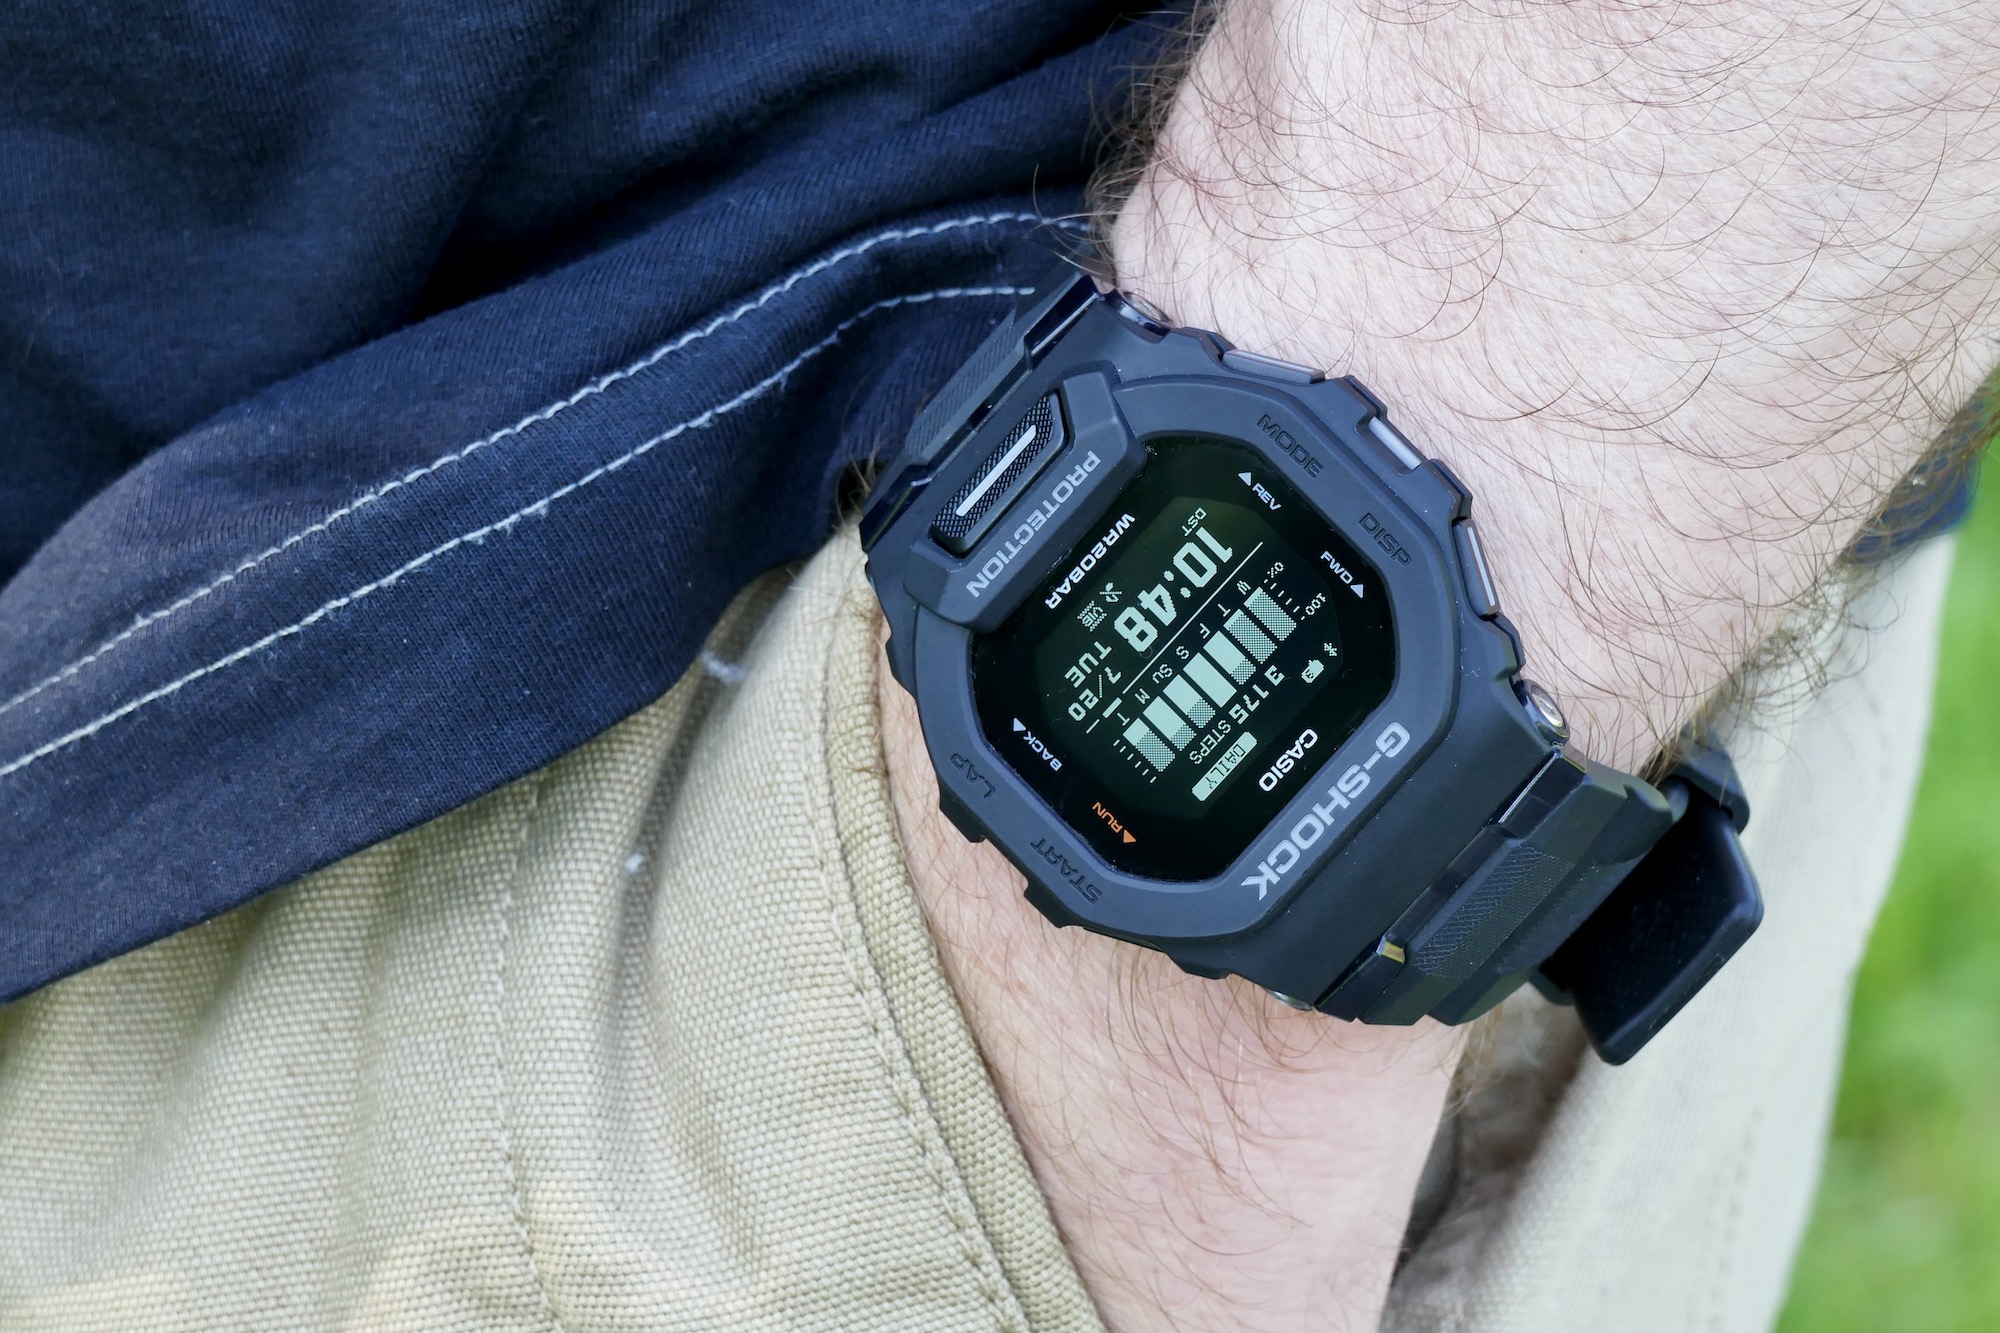 antydning gift pels Casio G-Shock GBD-200 Review: Perfectly Balanced | Digital Trends